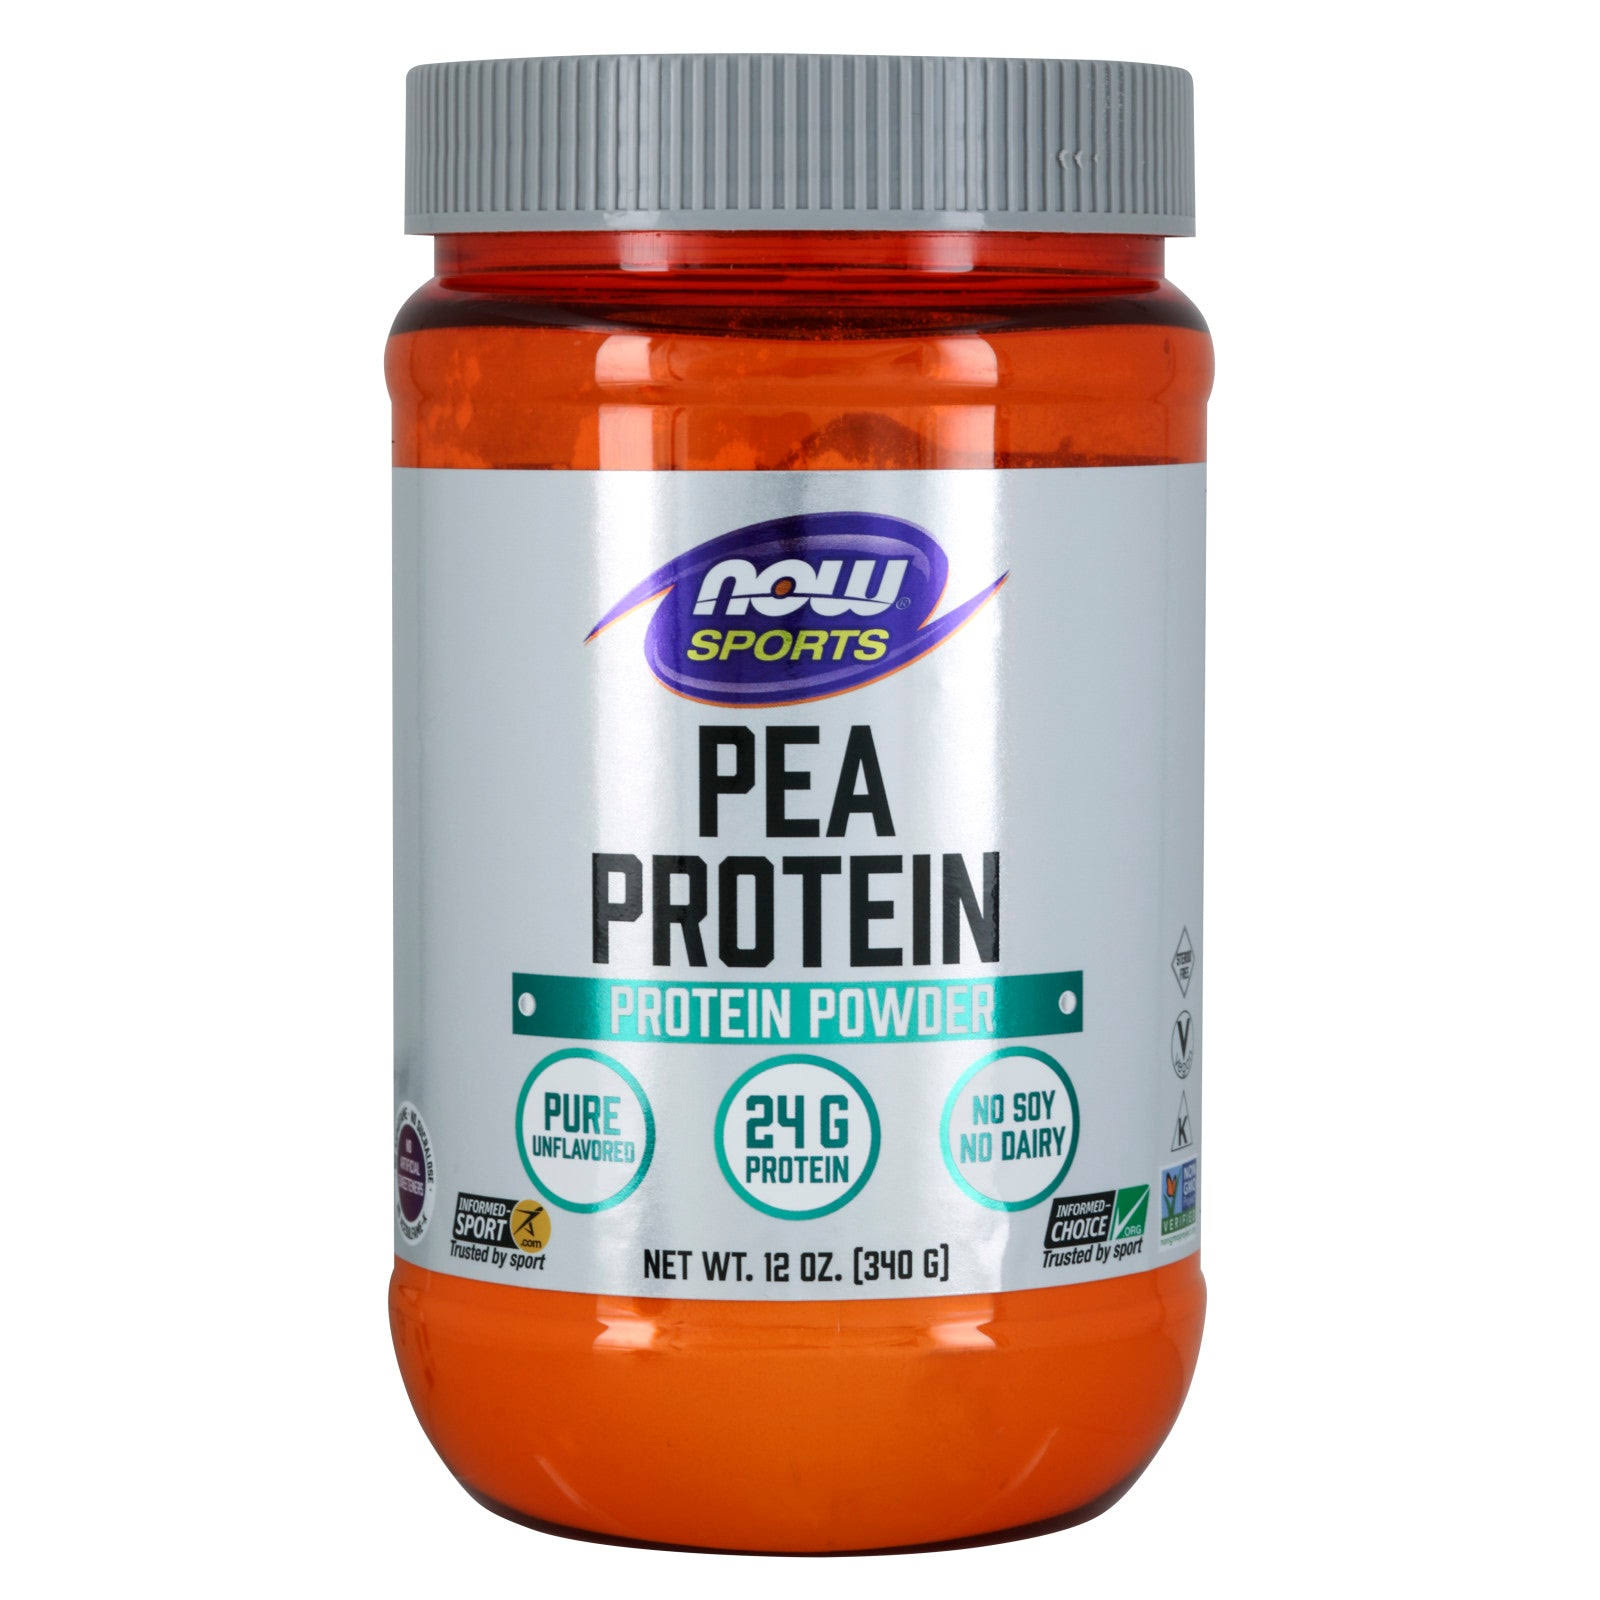 Now Foods Pea Protein - 340g, Unflavored